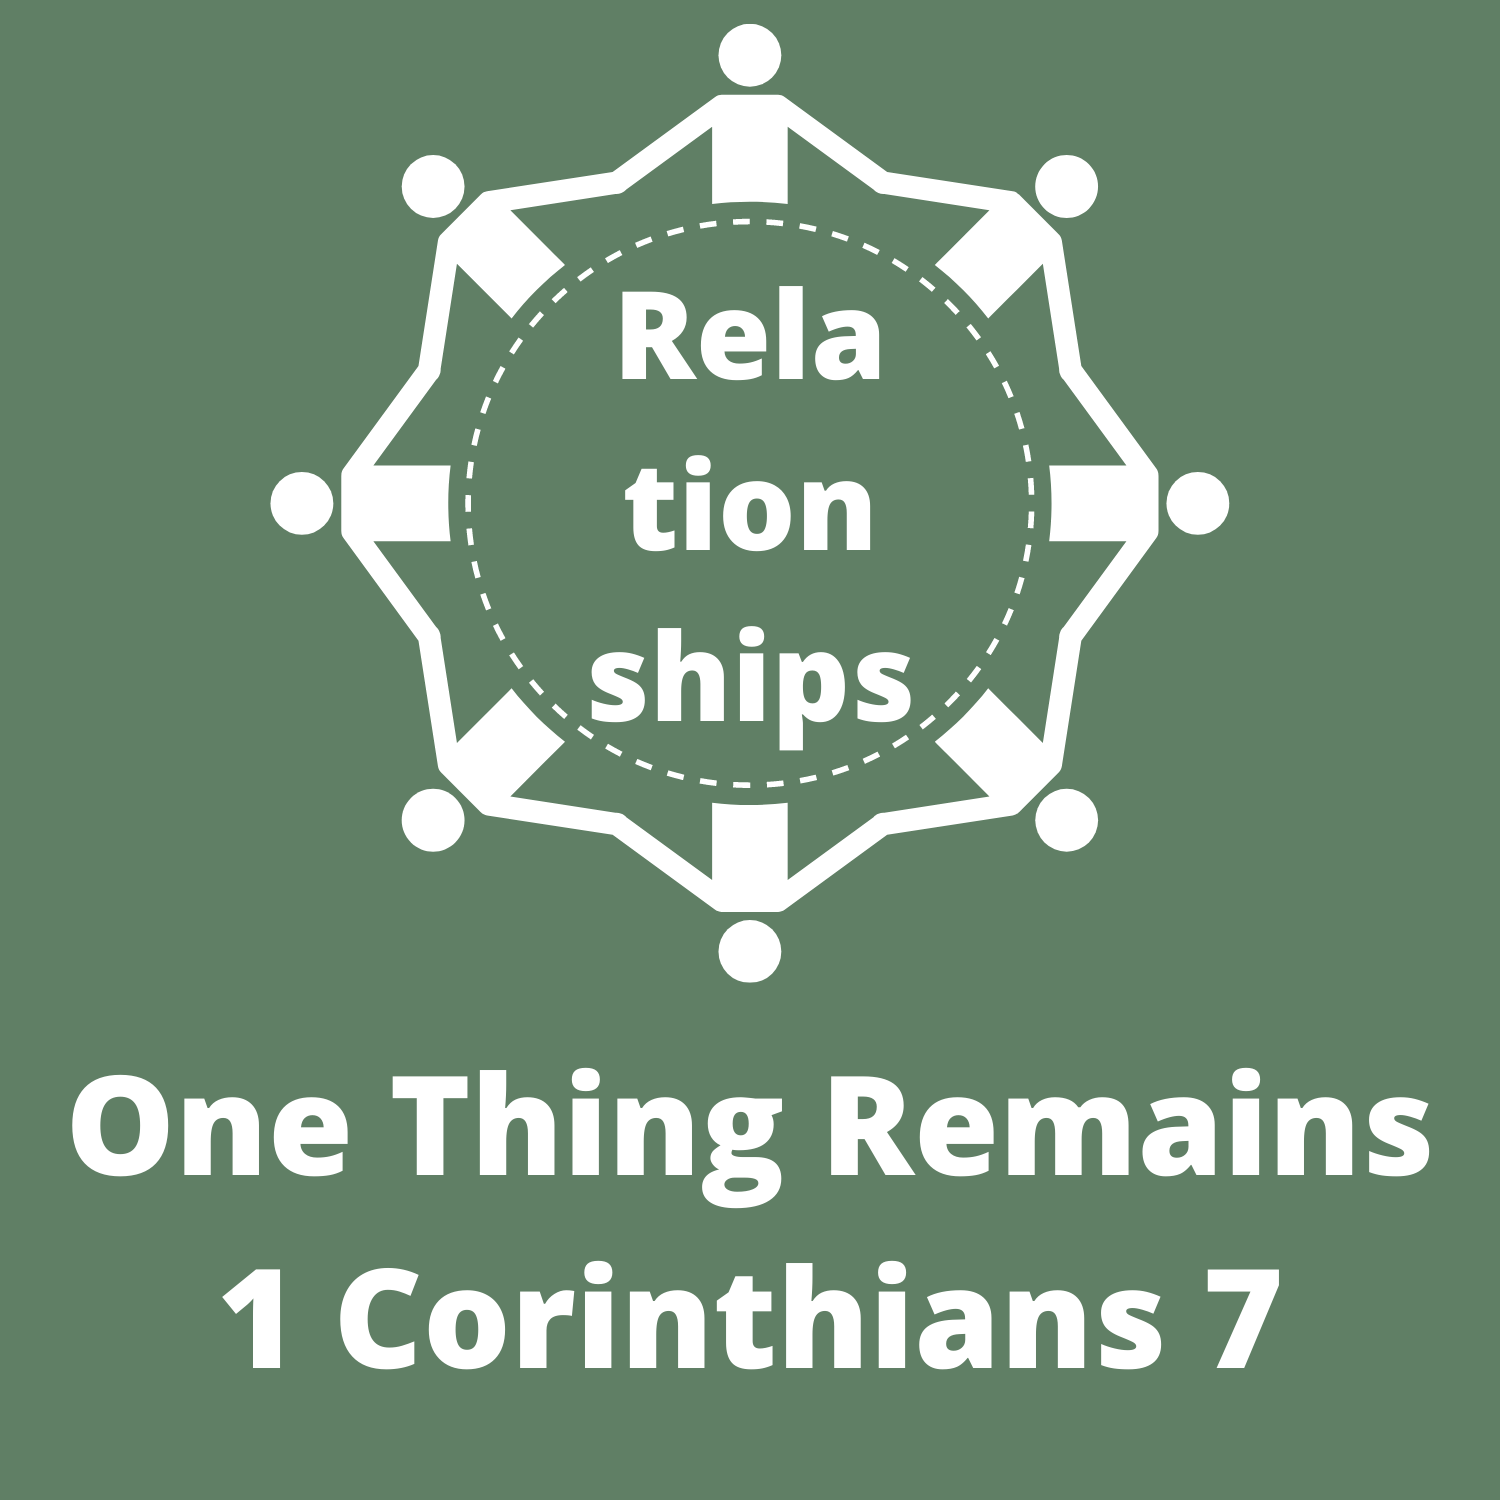 1 Corinthians 7 - One Thing Remains